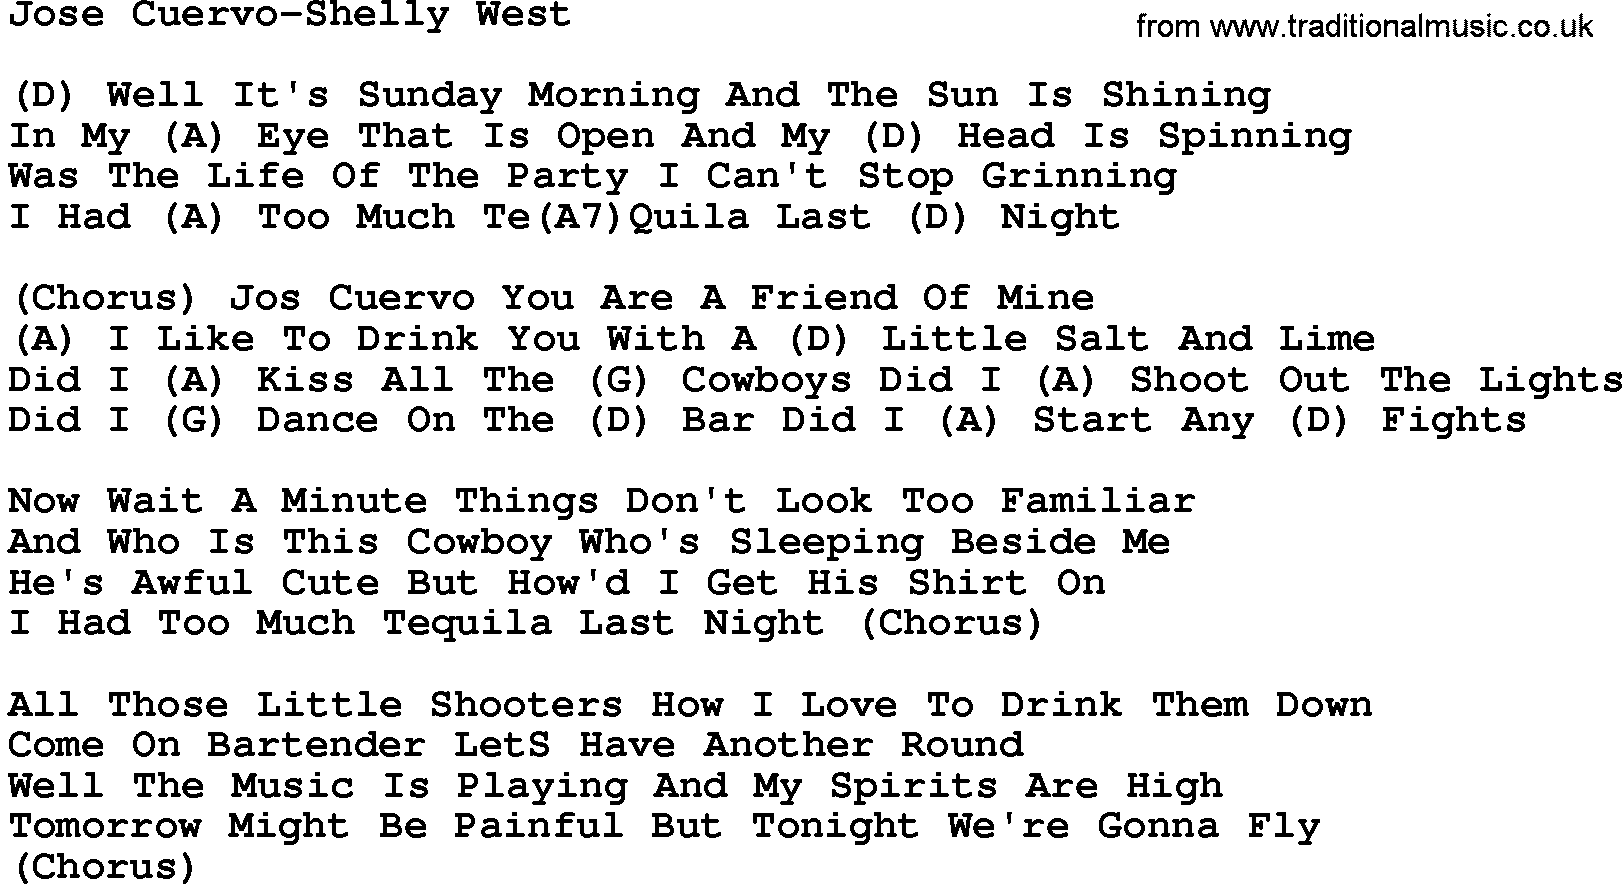 Country music song: Jose Cuervo-Shelly West lyrics and chords